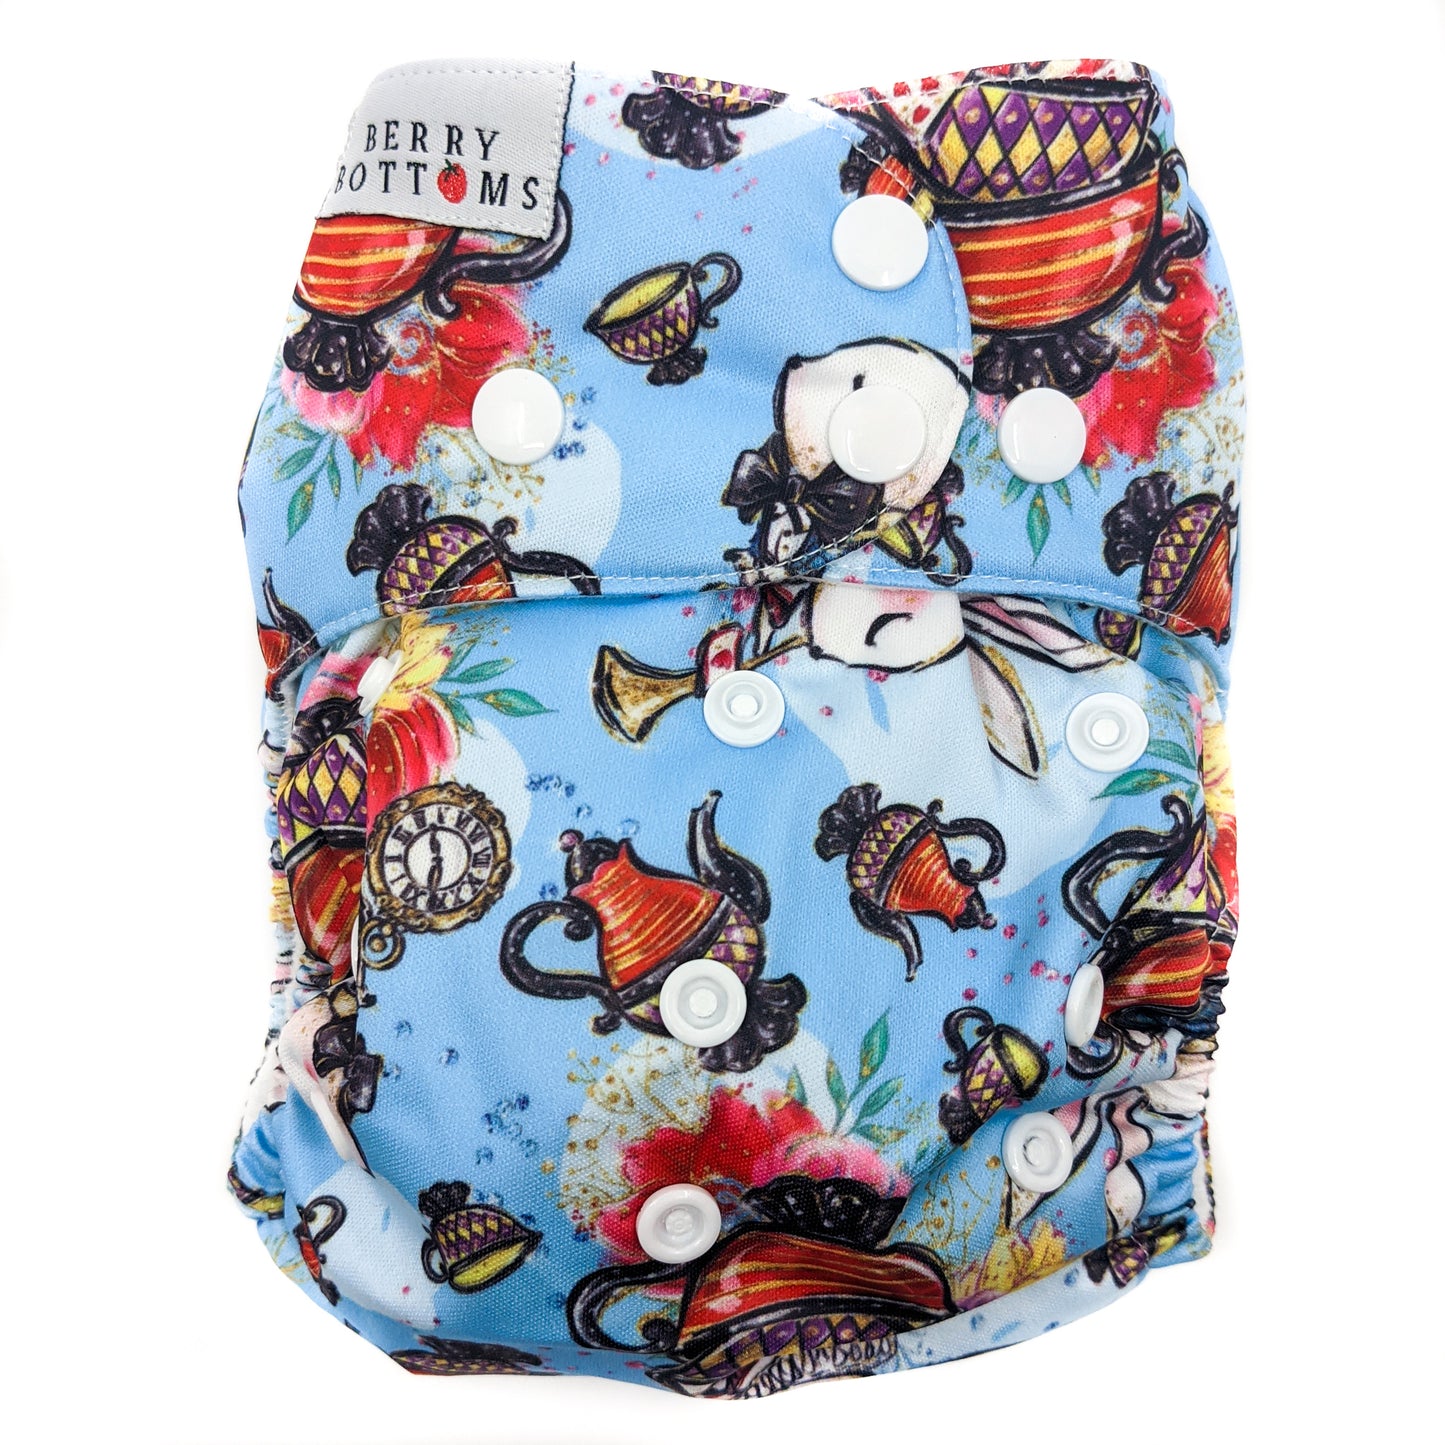 Cloth Nappies - Sale- Clearance 60% OFF